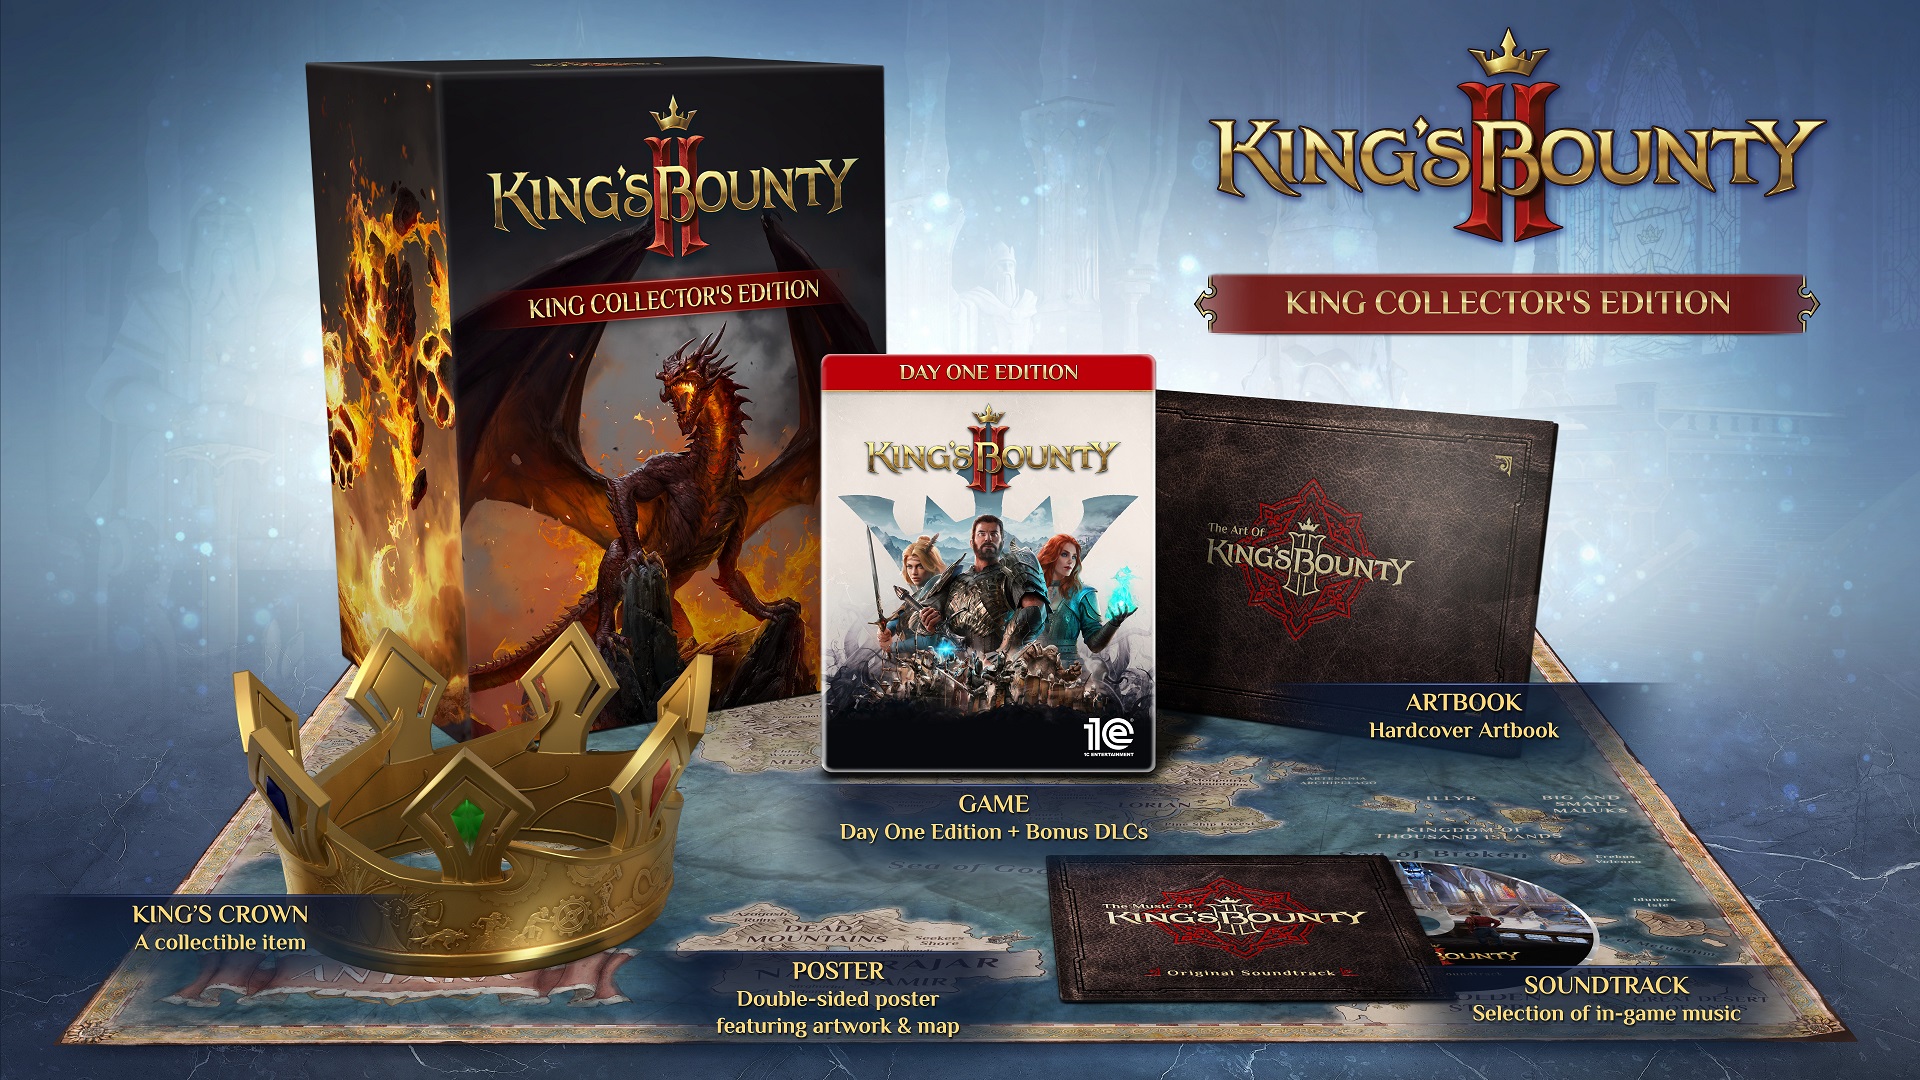 King's Bounty II Collector's Edition